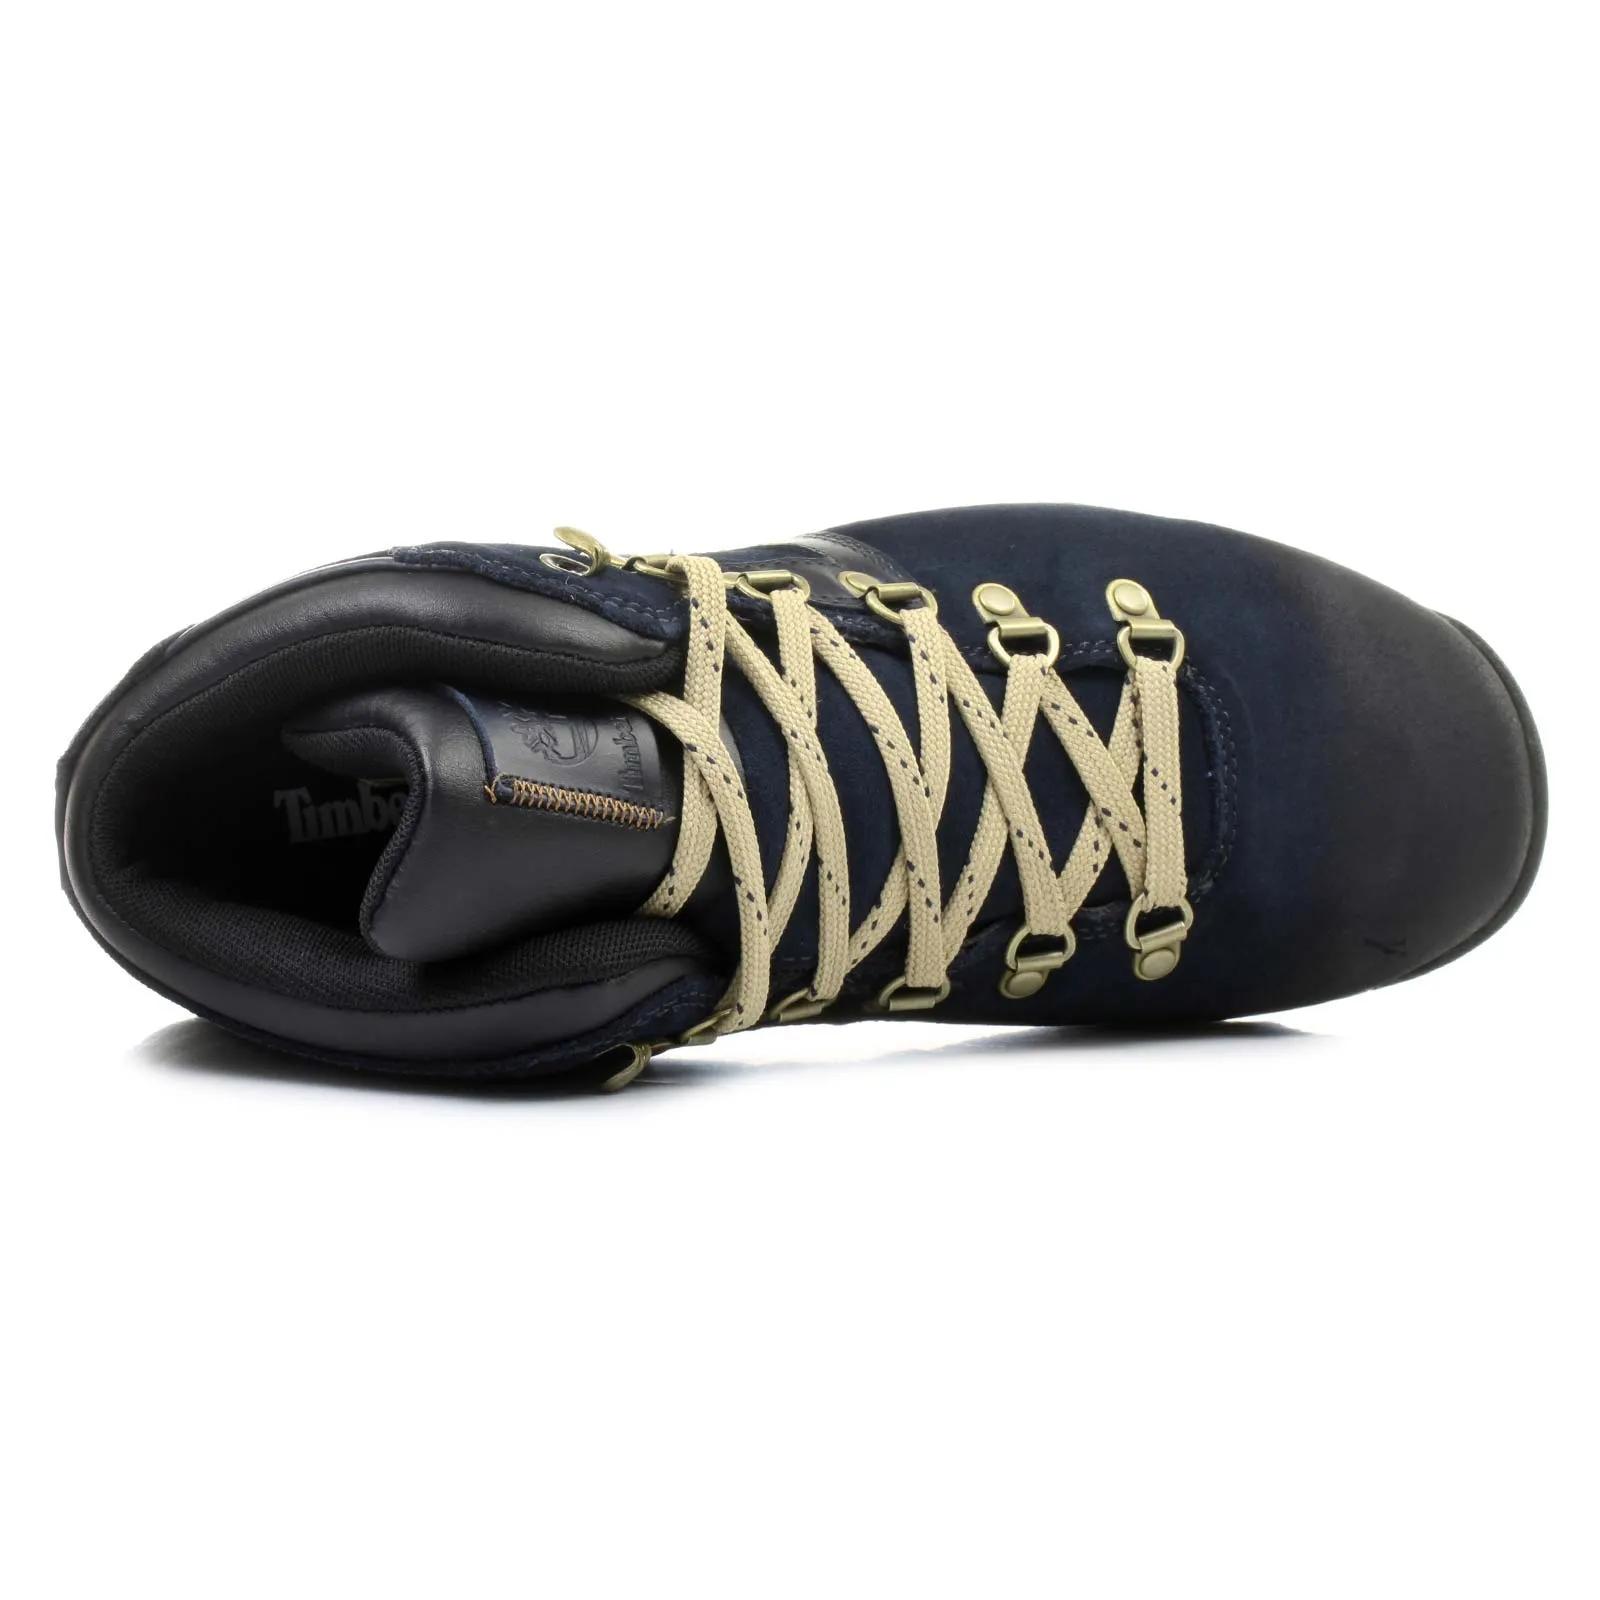 Timberland -1 GT Scramble Mid Leather WP 